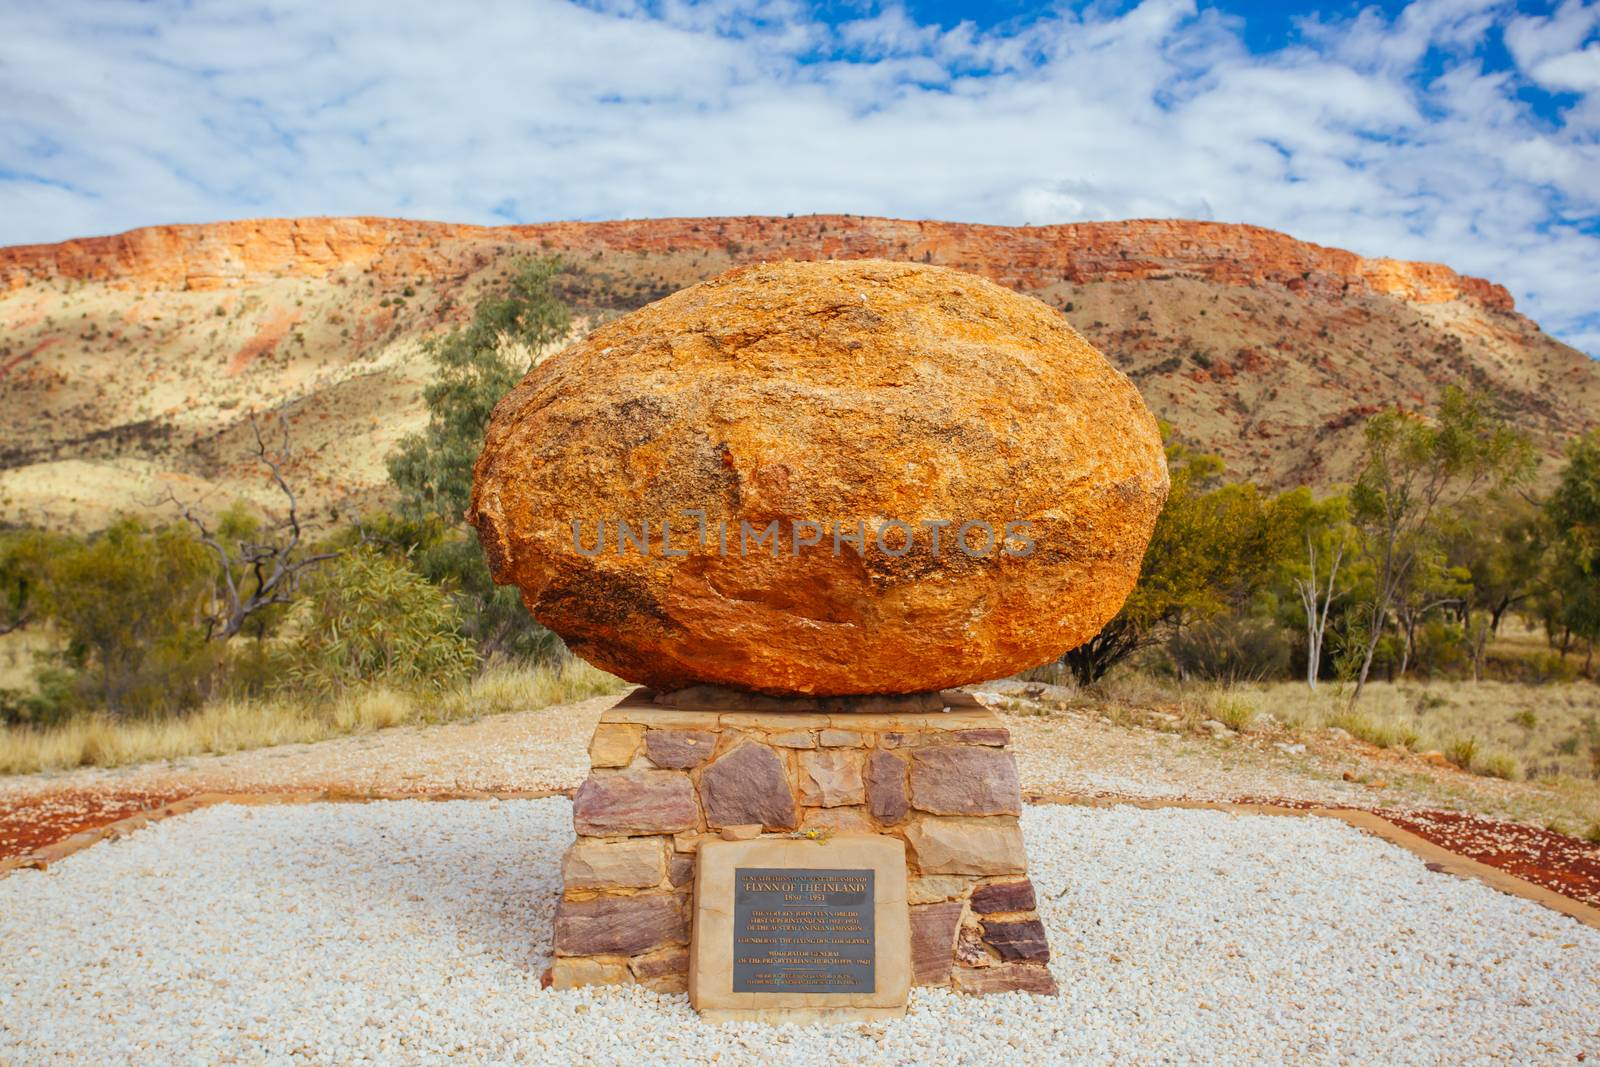 The final resting place of Flynn of the Inland, founder of the Flying Doctor Service, near Alice Springs, Northern Territory, Australia